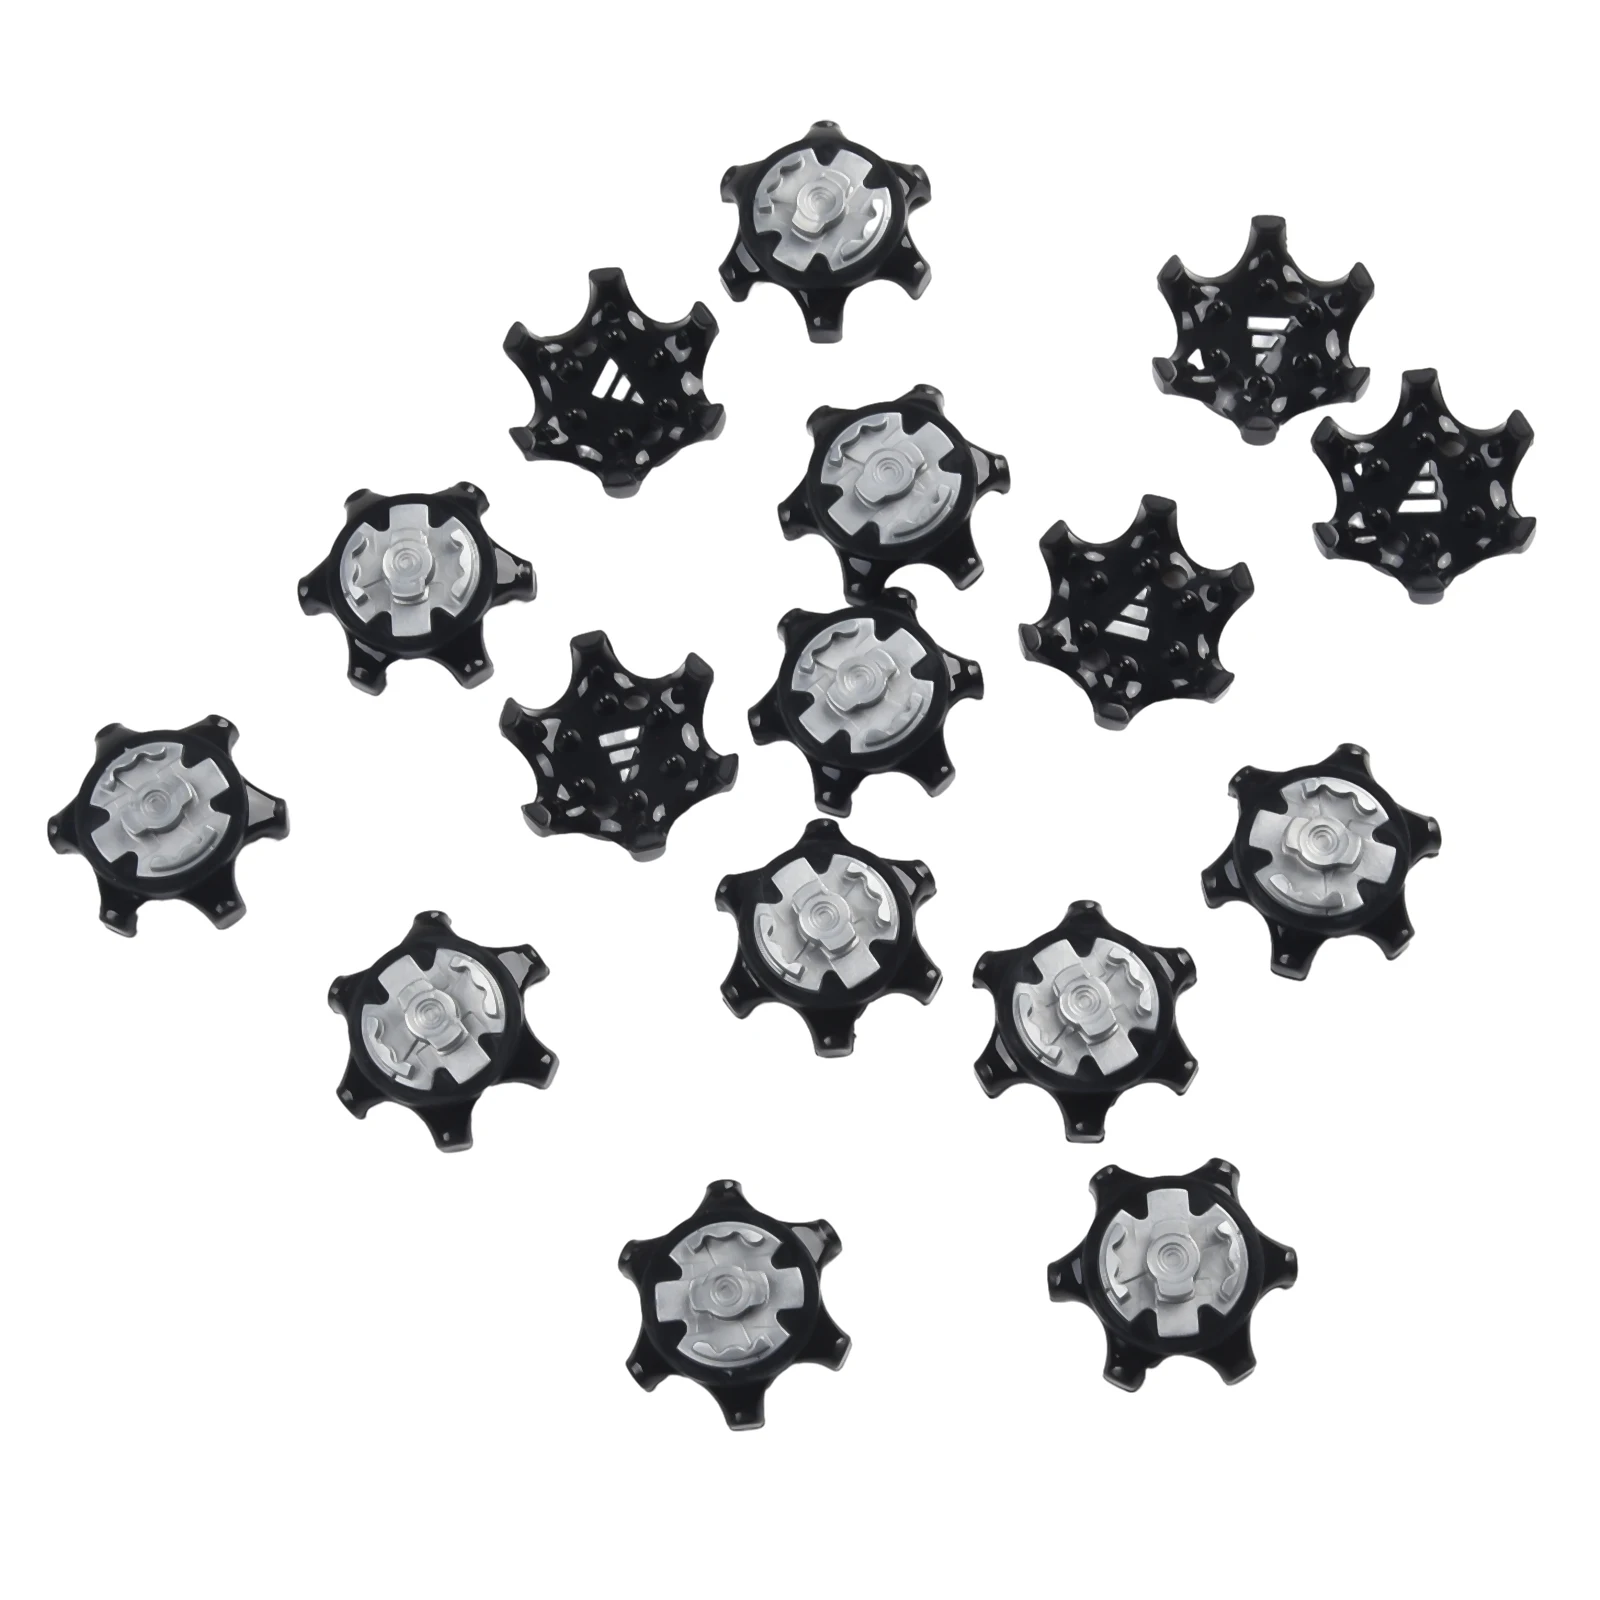 30pcs Golf Shoe Spikes Replace Clamp Cleat Screw-in Removal Tools Plastic Black Golf Supply Part For Superior Comfort Durability